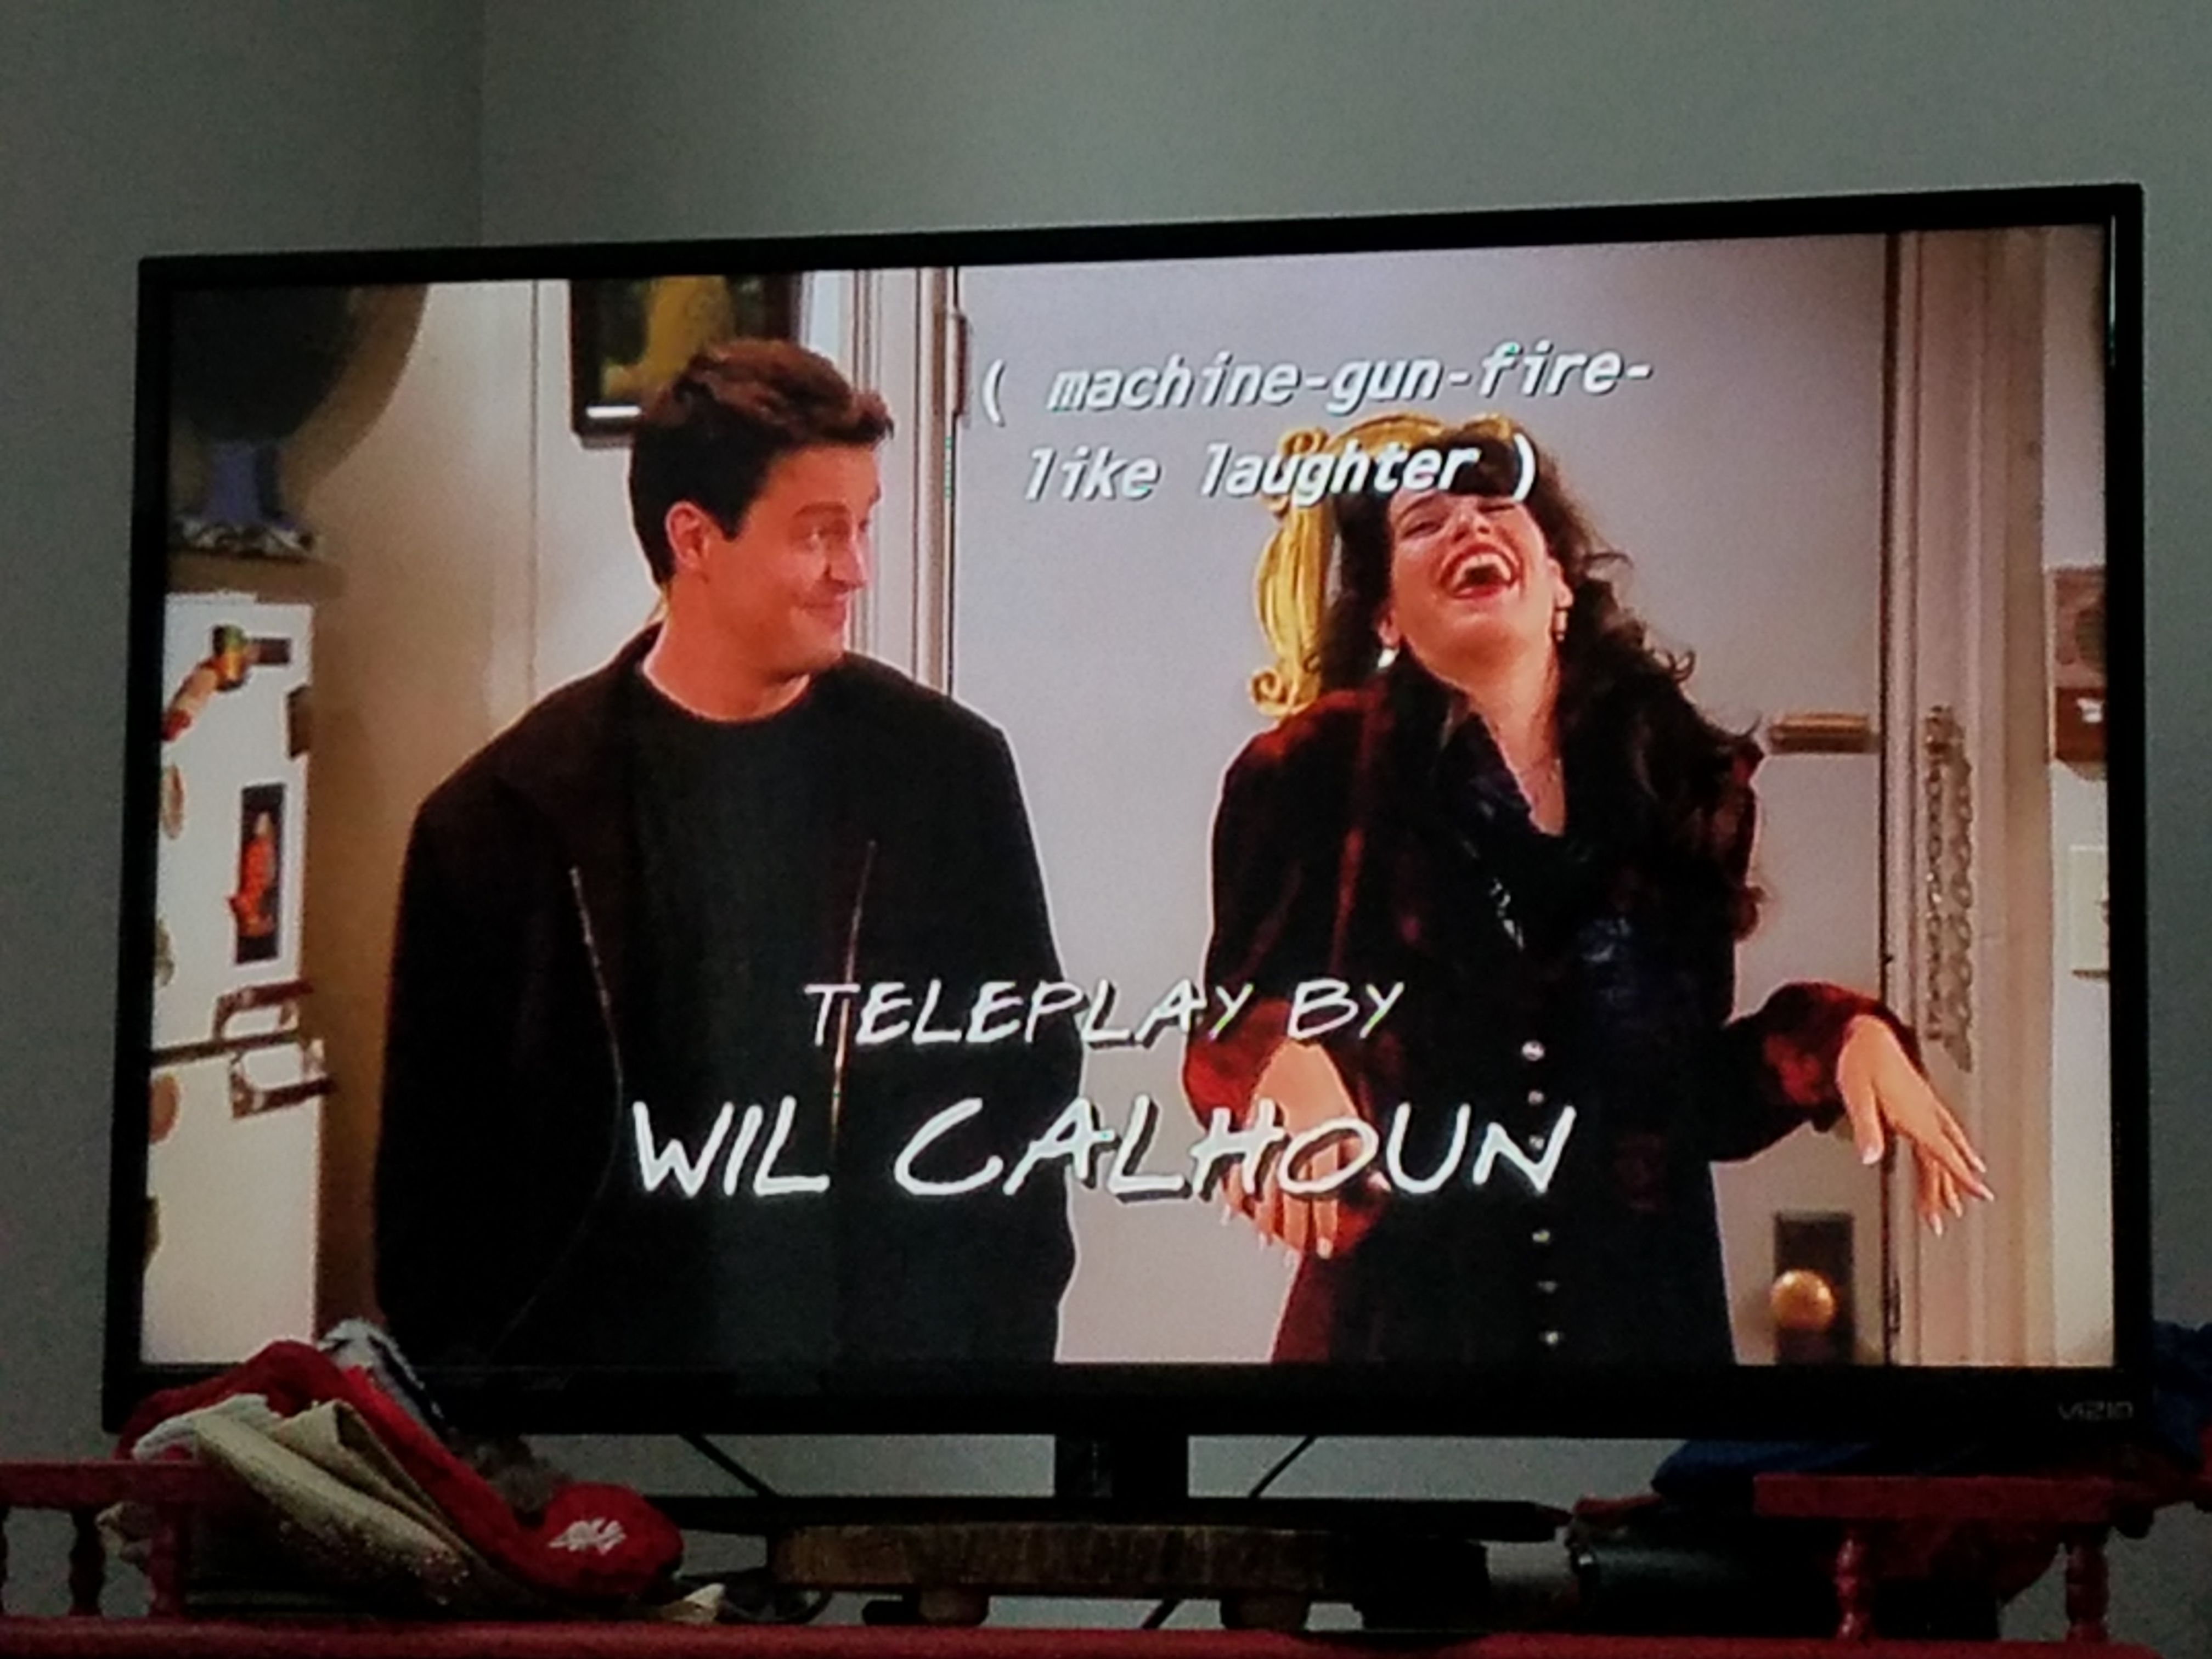 Whoever captioned this episode of Friends was spot on.